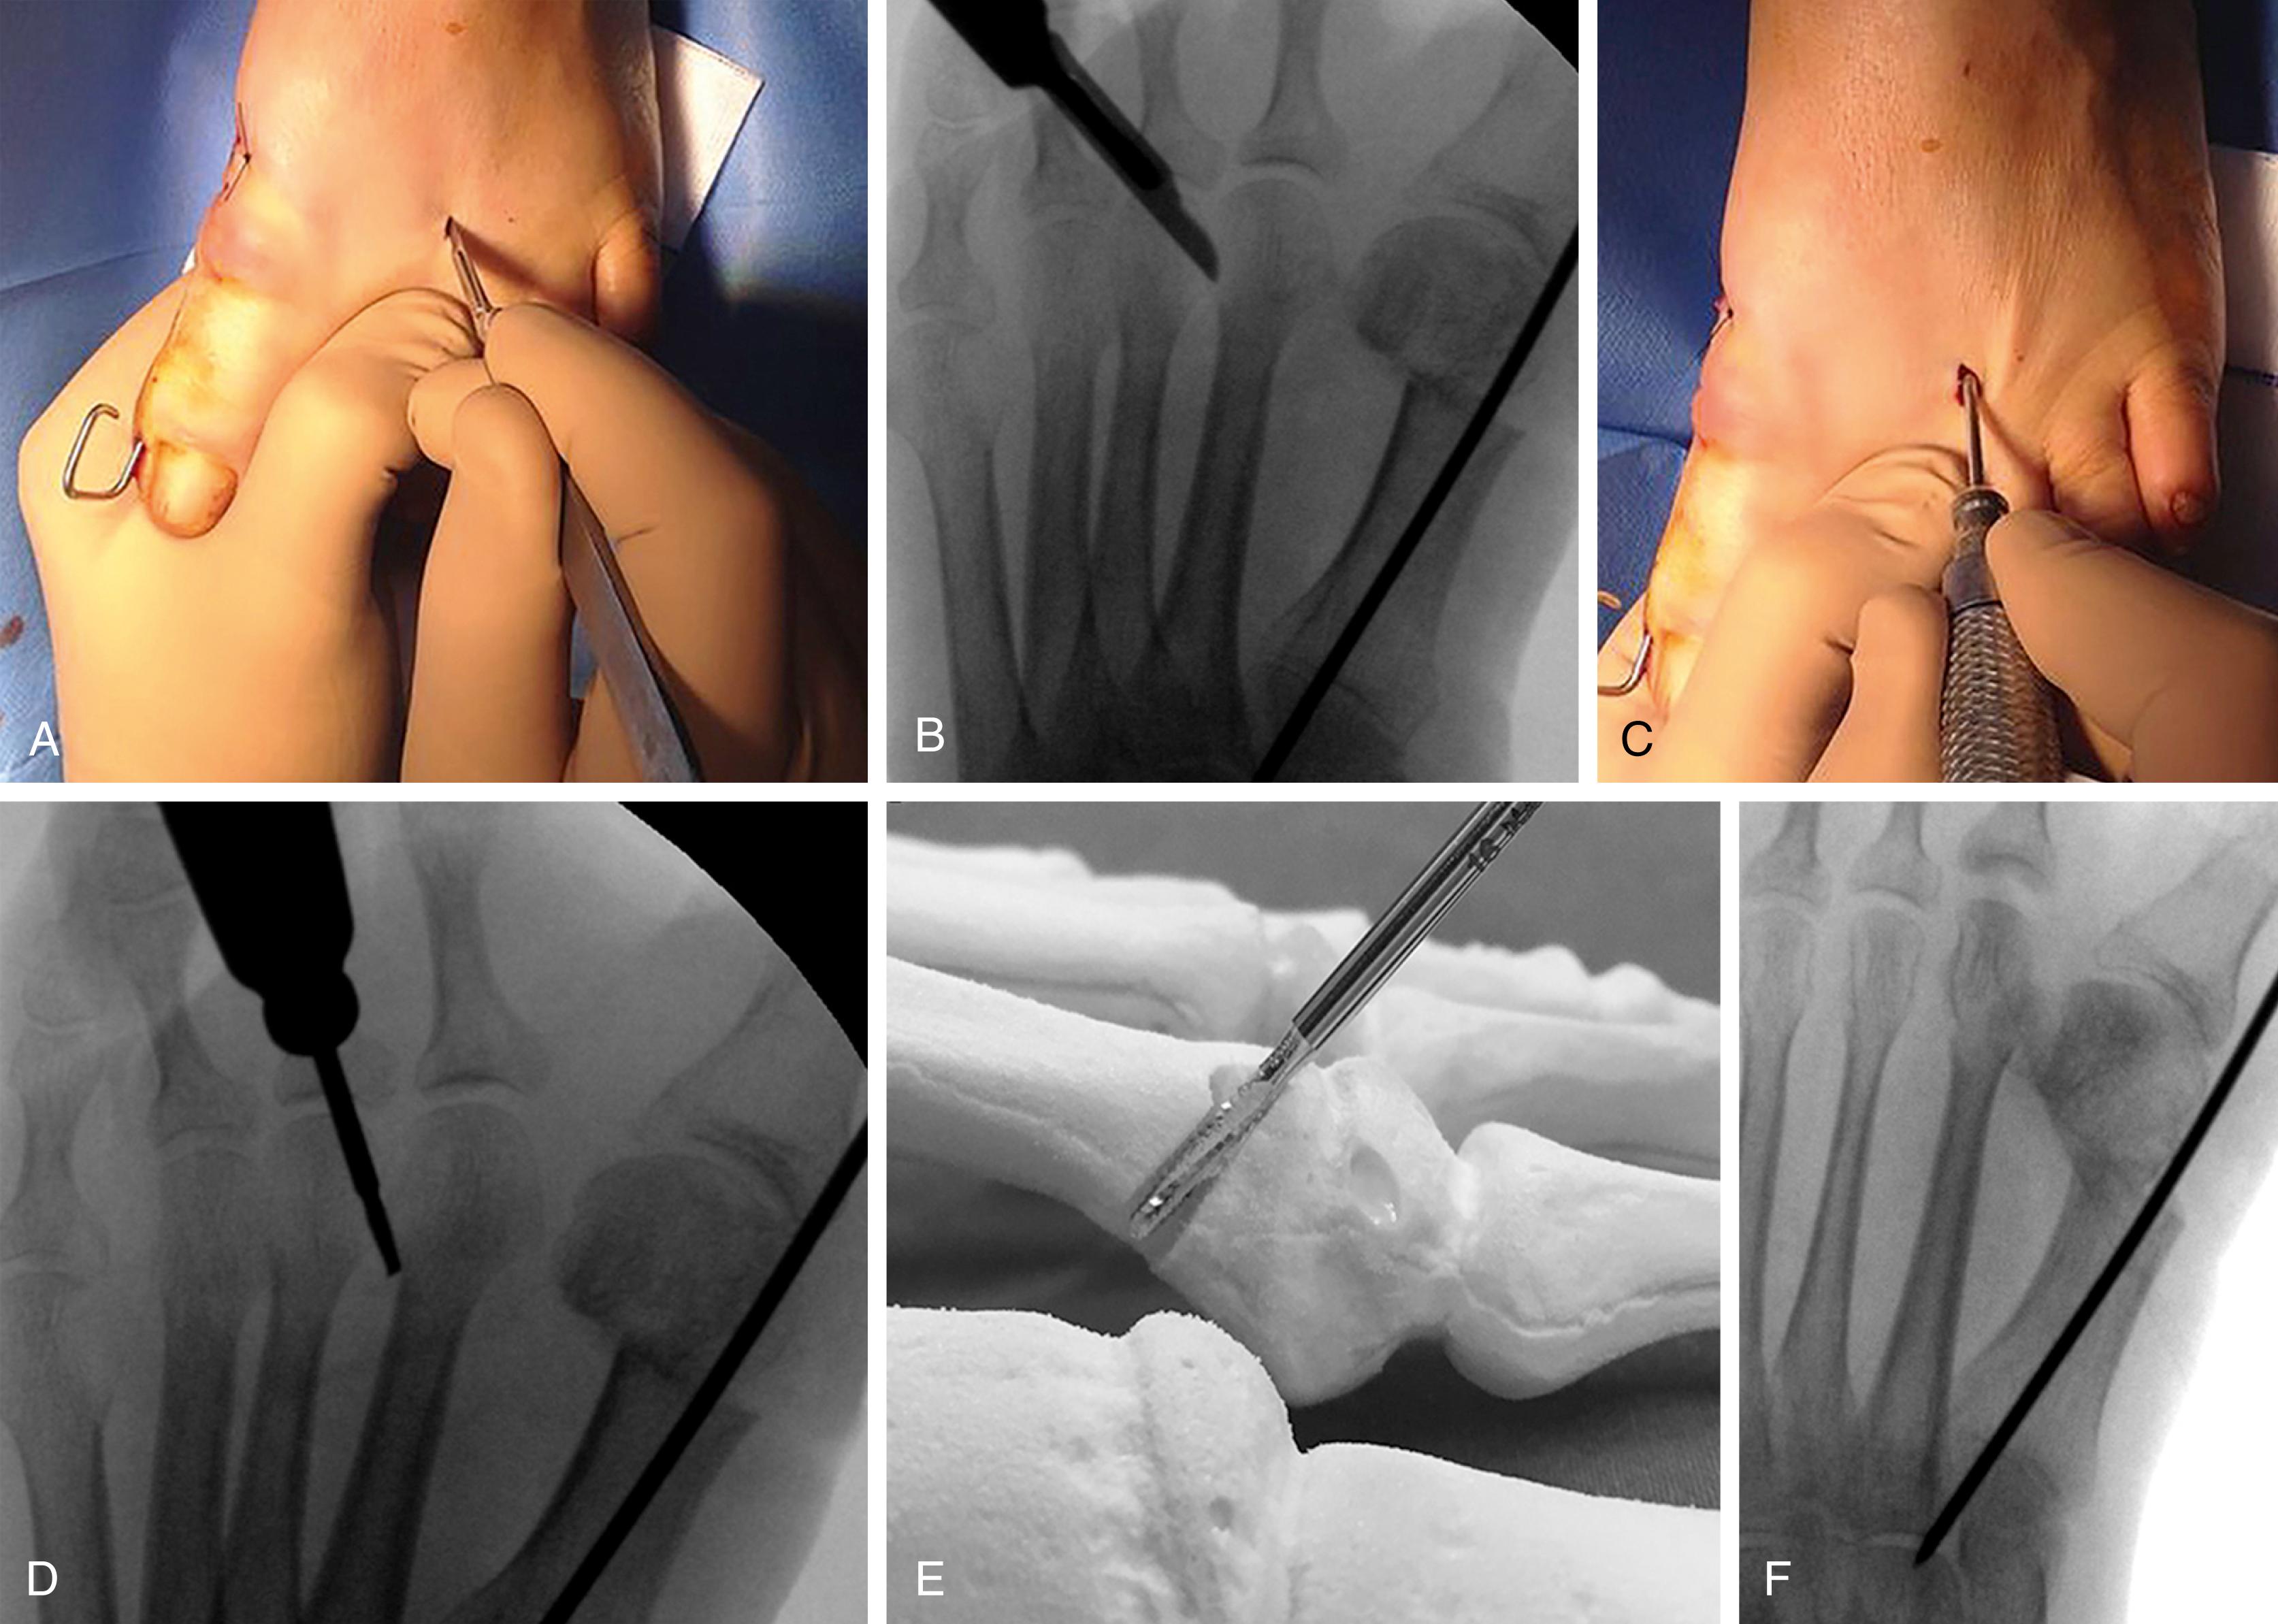 FIGURE 84.13, Percutaneous distal osteotomy of the lesser metatarsals. A and B , Incision. C-E , Osteotomy performed with micromotorized bone-cutter. F , Completion of osteotomy confirmed fluoroscopically. (From Magnan B, Bonetti I, Negri S, et al: Percutaneous distal osteotomy of lesser metatarsals (DMMO) for treatment of metatarsalgia with metatarsophalangeal instability, Foot Ankle Surg 24:400, 2018.) SEE TECHNIQUE 84.3 .